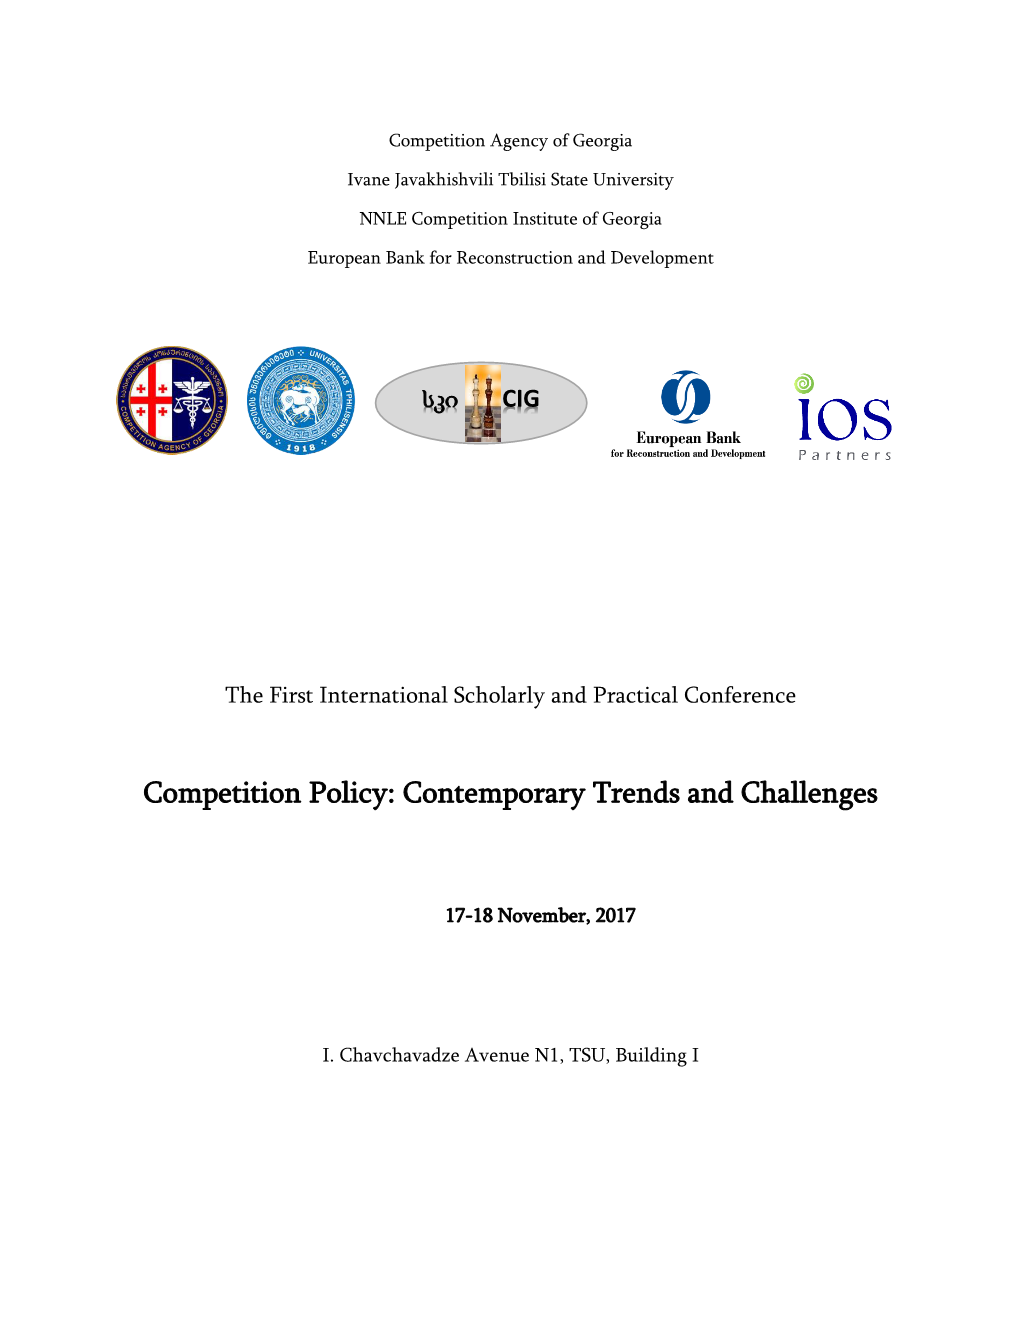 Competition Policy: Contemporary Trends and Challenges